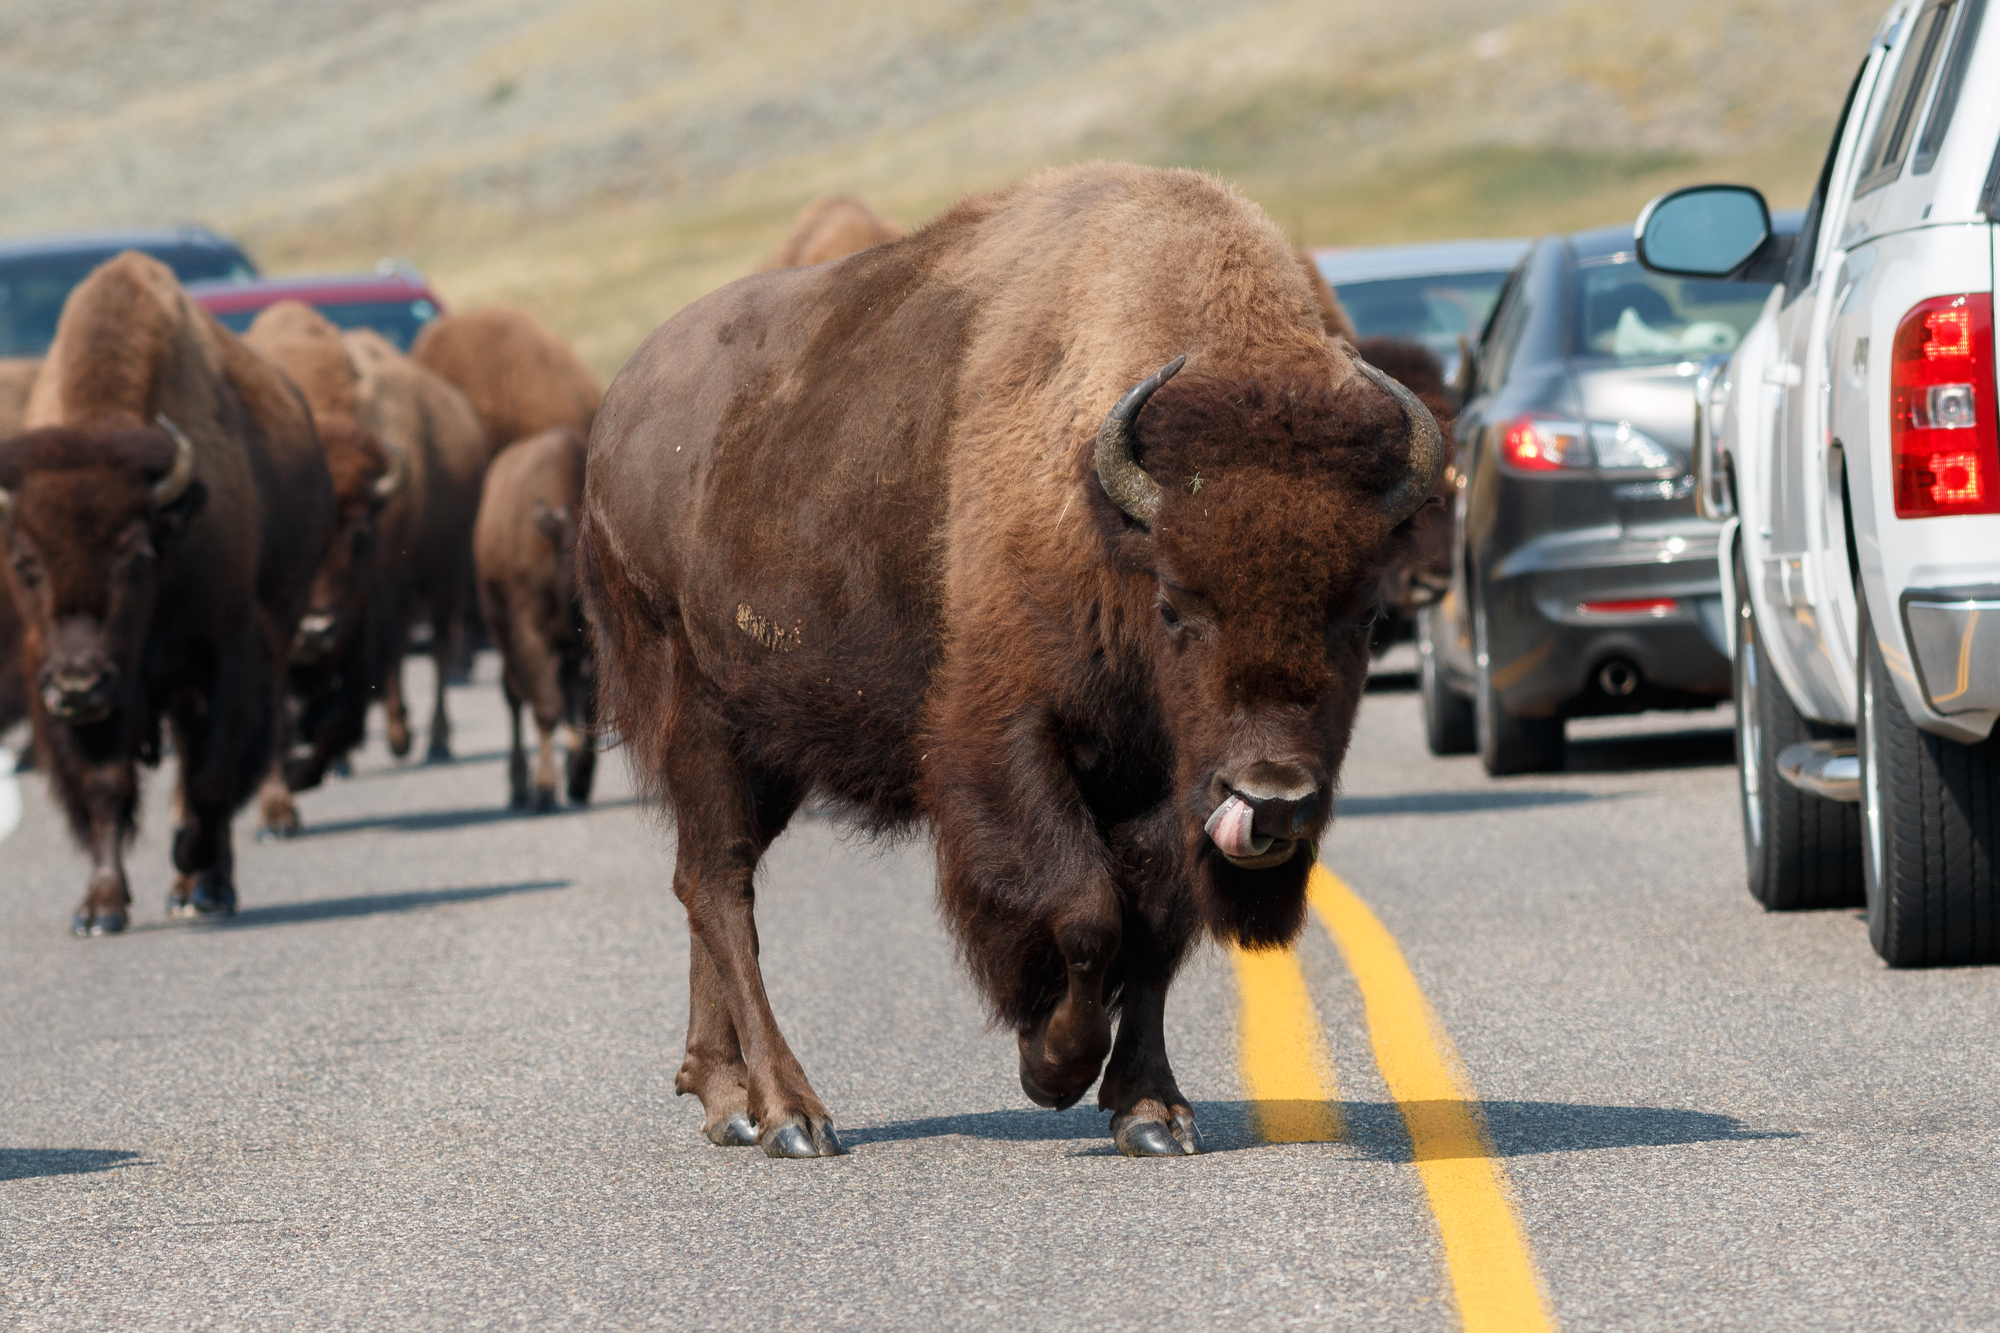 photograph of bison on the road in Yellowstone National Park